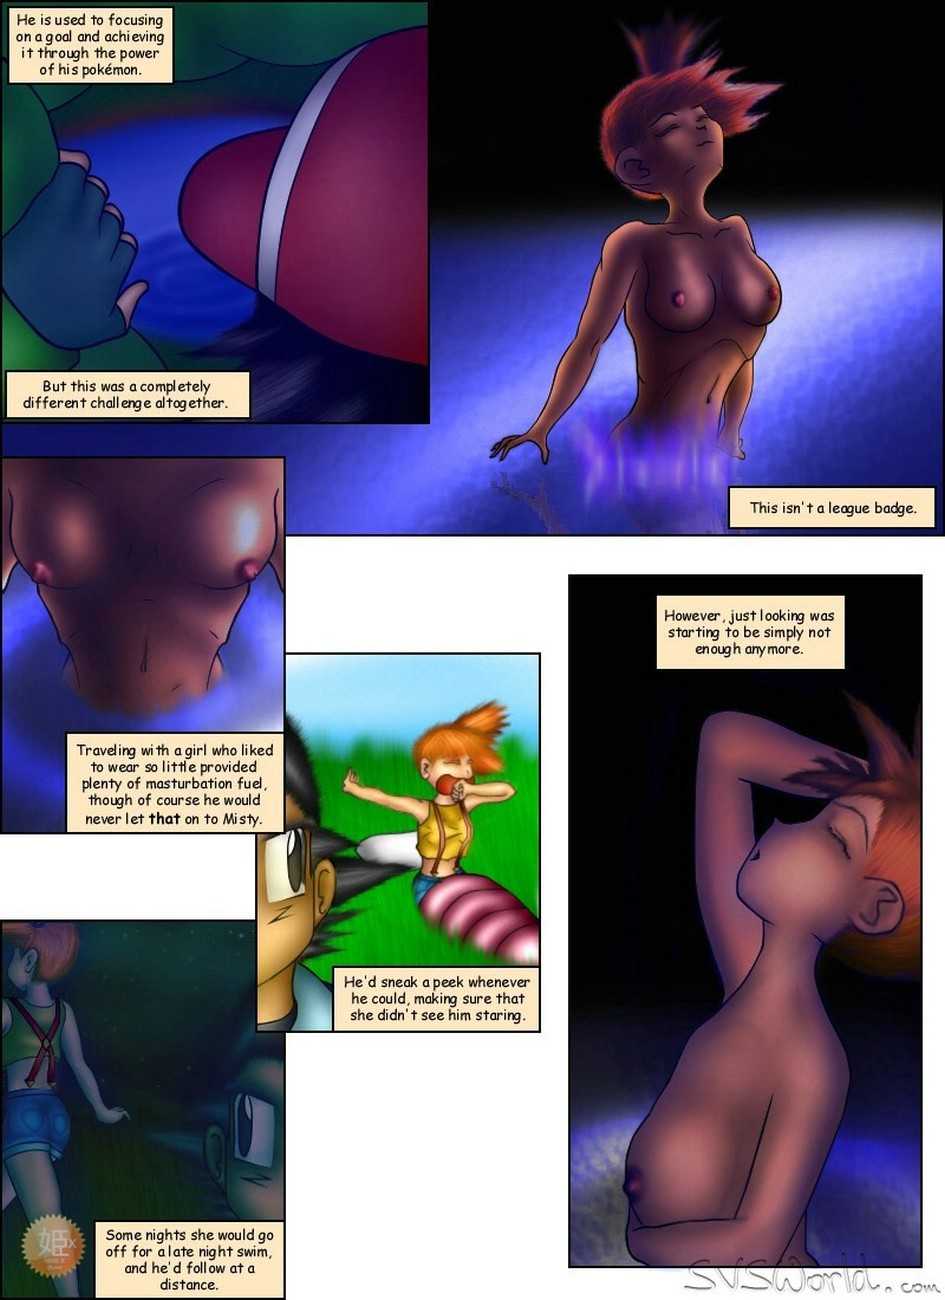 Pokerotica page 3